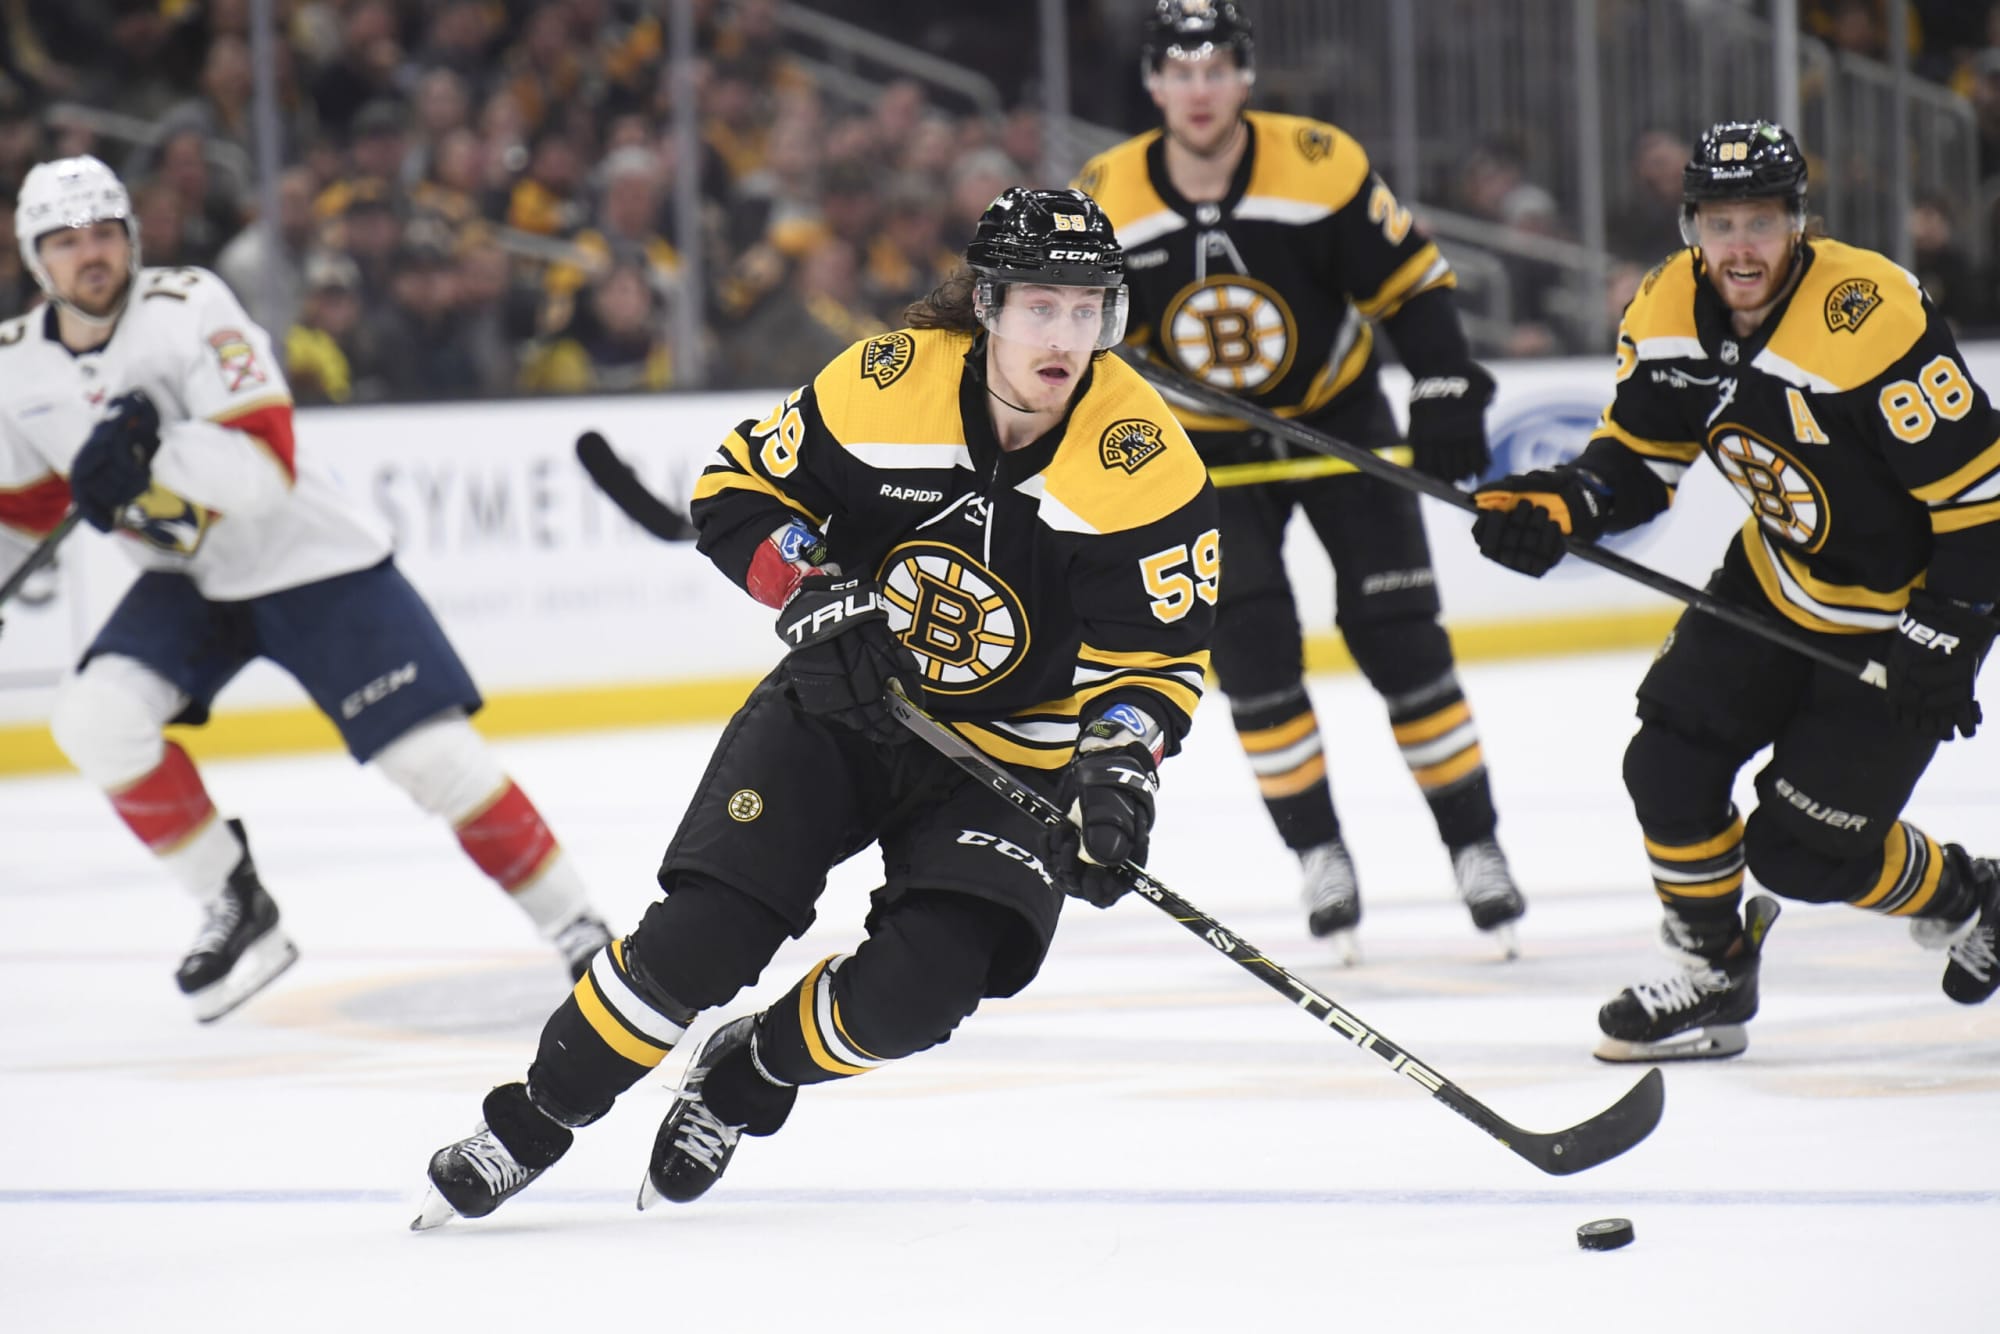 Bruins offseason: Who stays, who goes? Big decisions ahead for